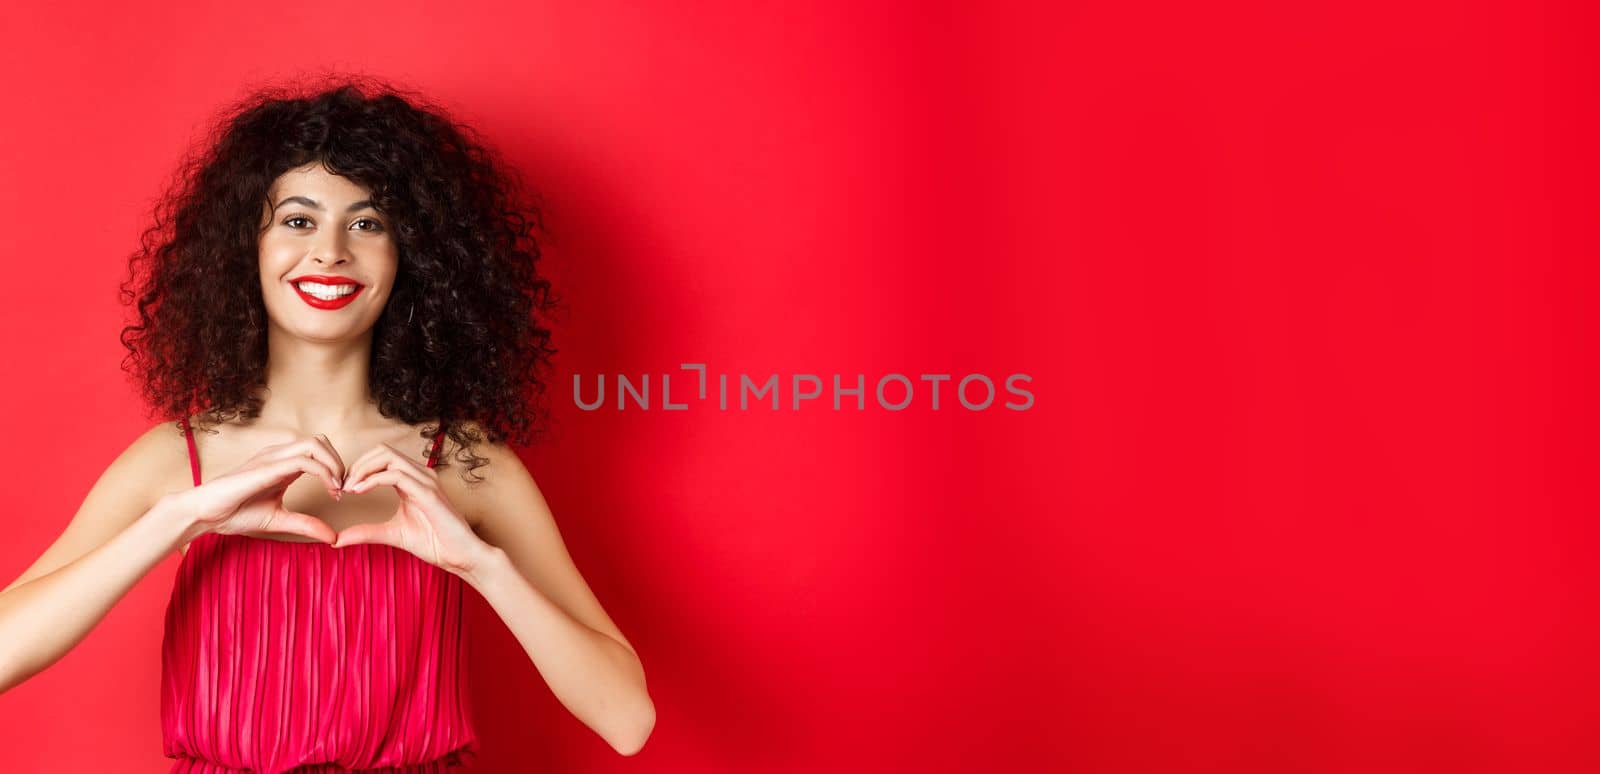 Valentines day. Romantic girl with curly hairstyle in evening dress, smiling and showing heart sign, say I love you on lovers holiday, standing over red background by Benzoix